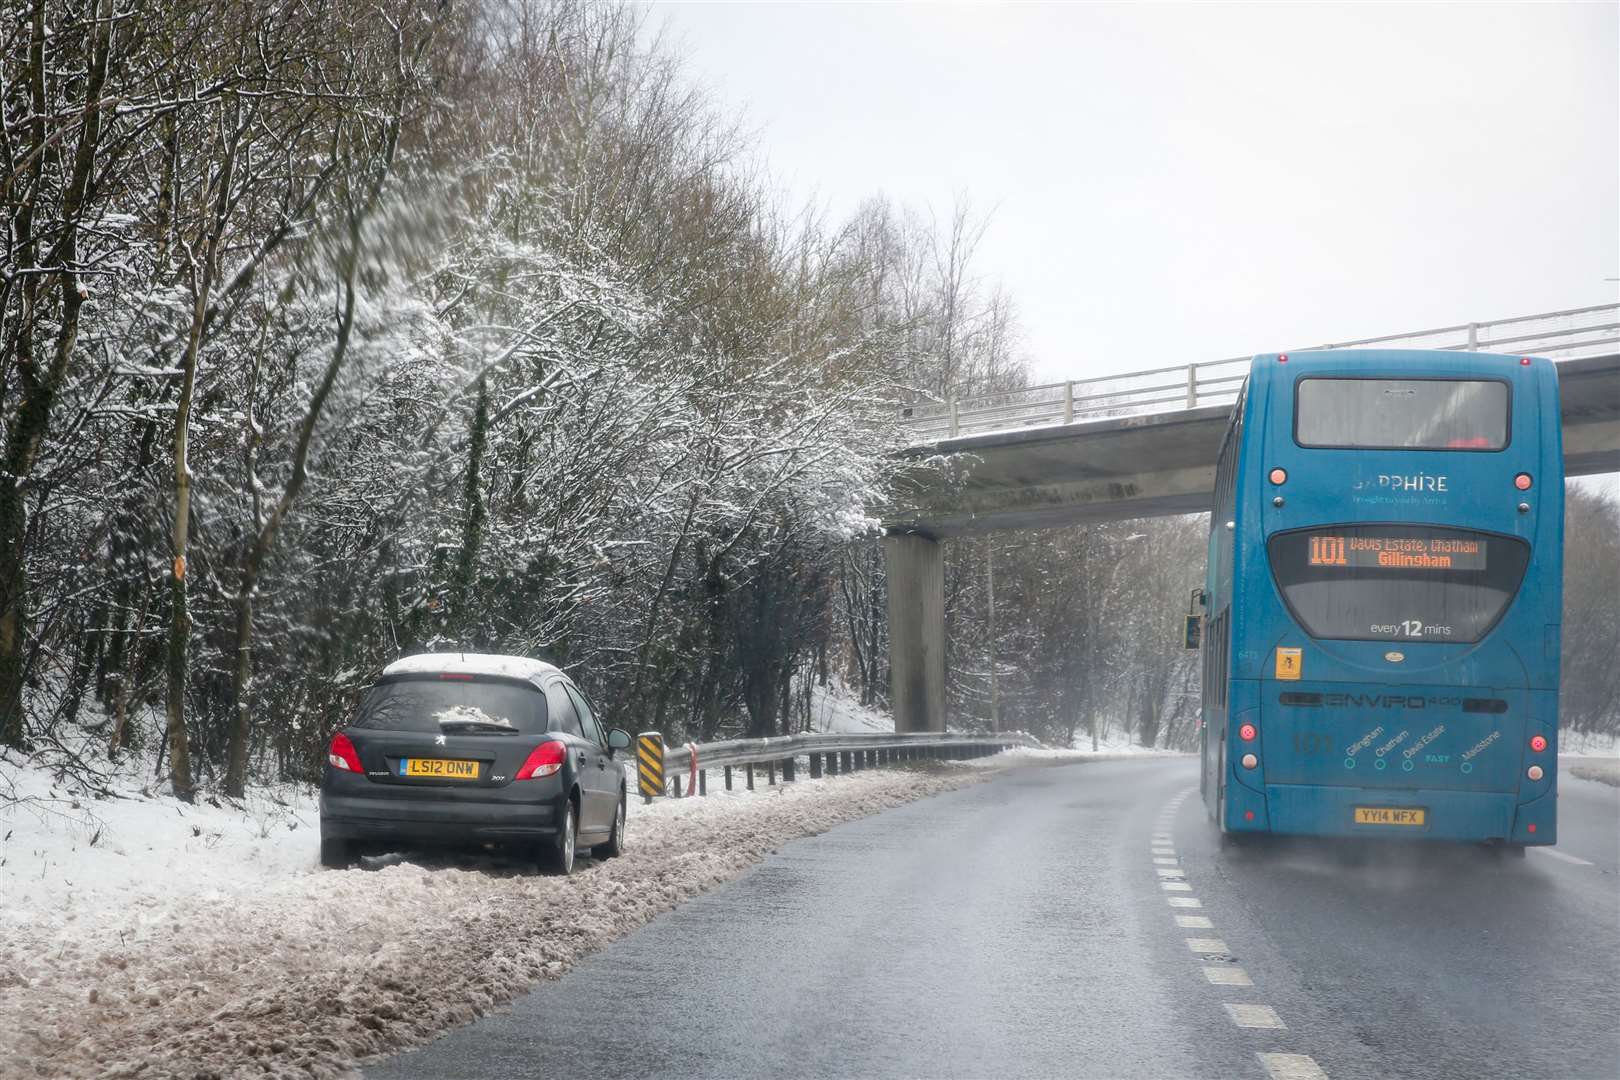 Drivers are being told to plan ahead with more snow forecast